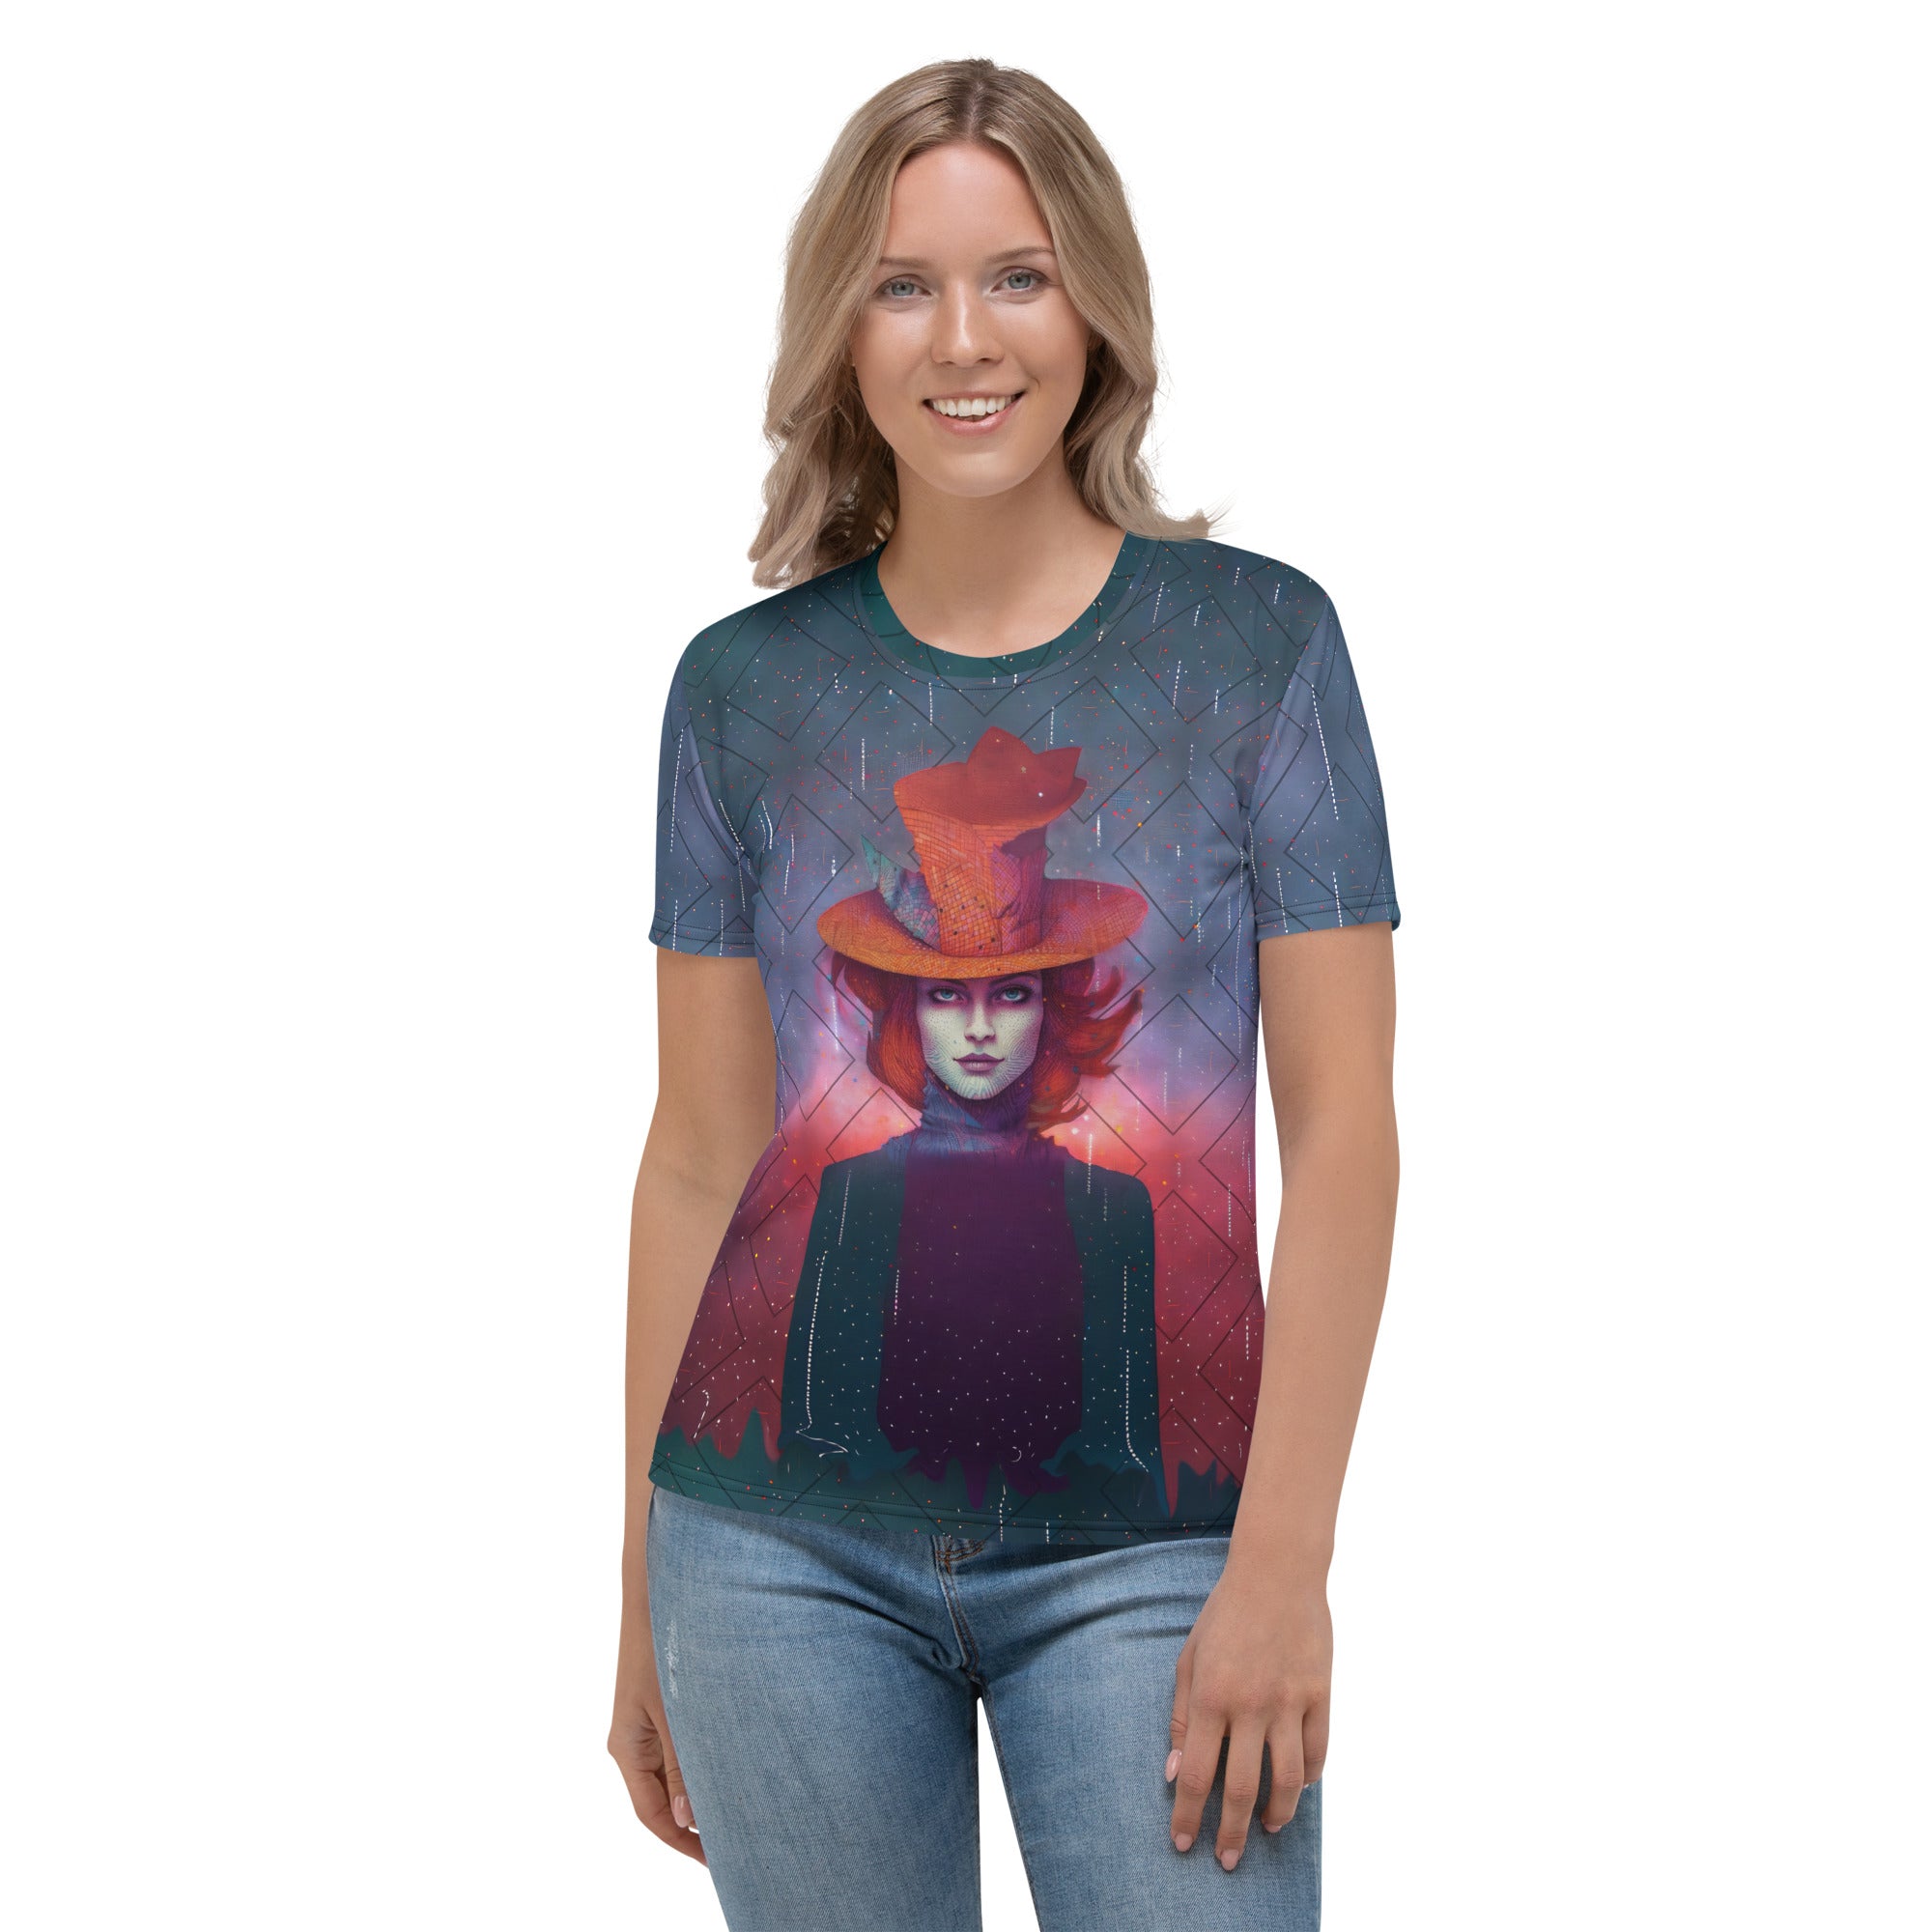 Whimsical Wanderlust Women's Crew Neck T-Shirt - styled outfit